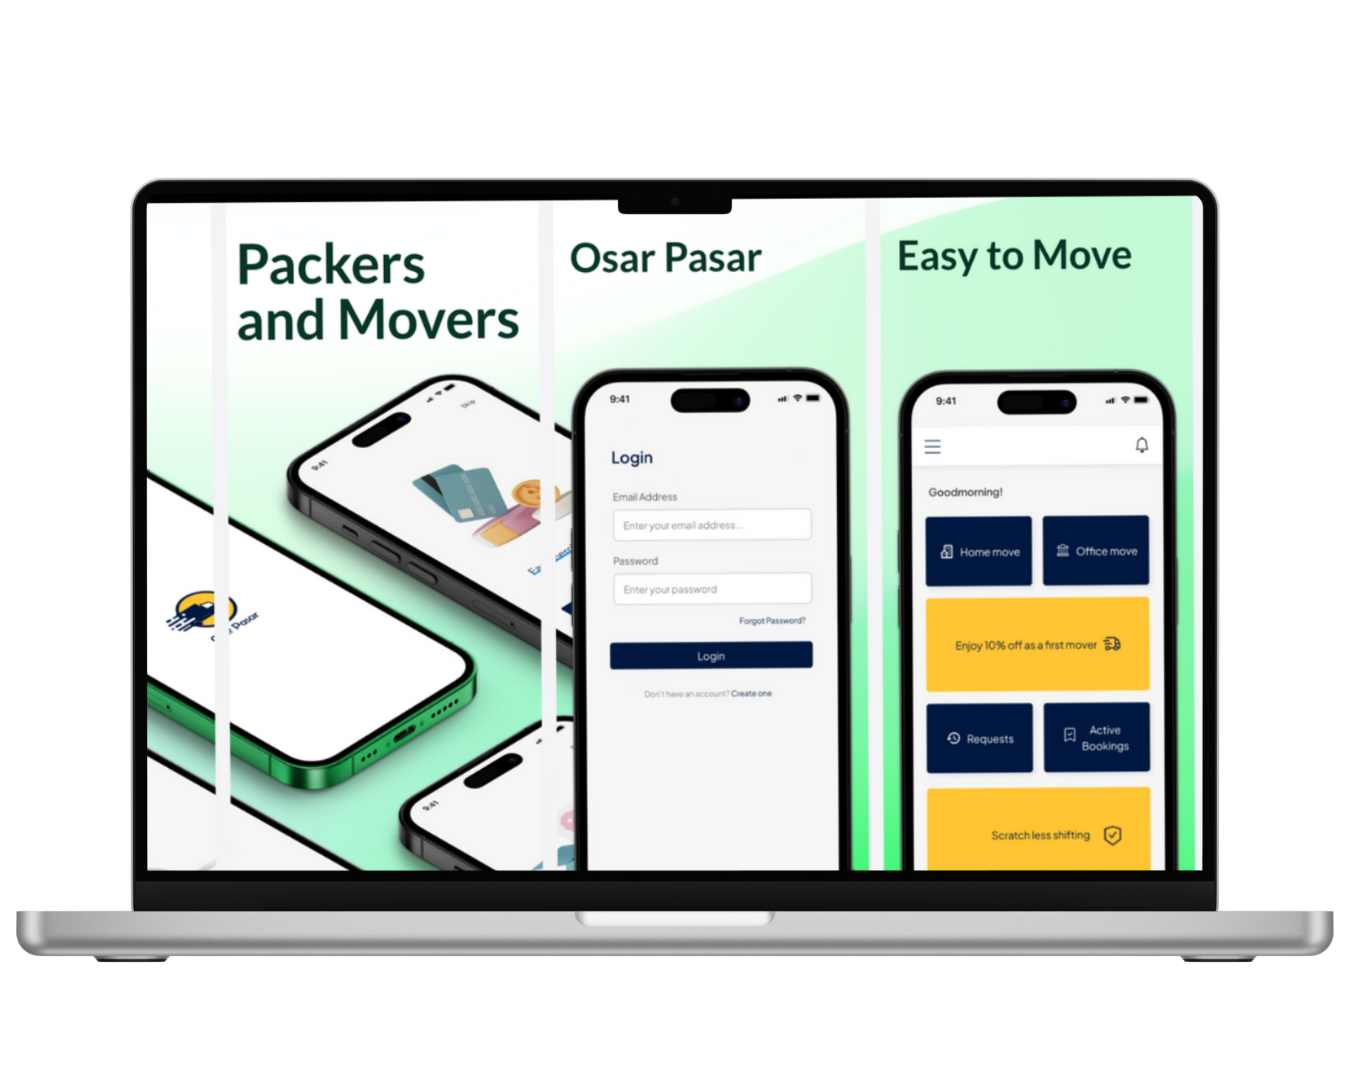 Osar Pasar, Packers And Movers App